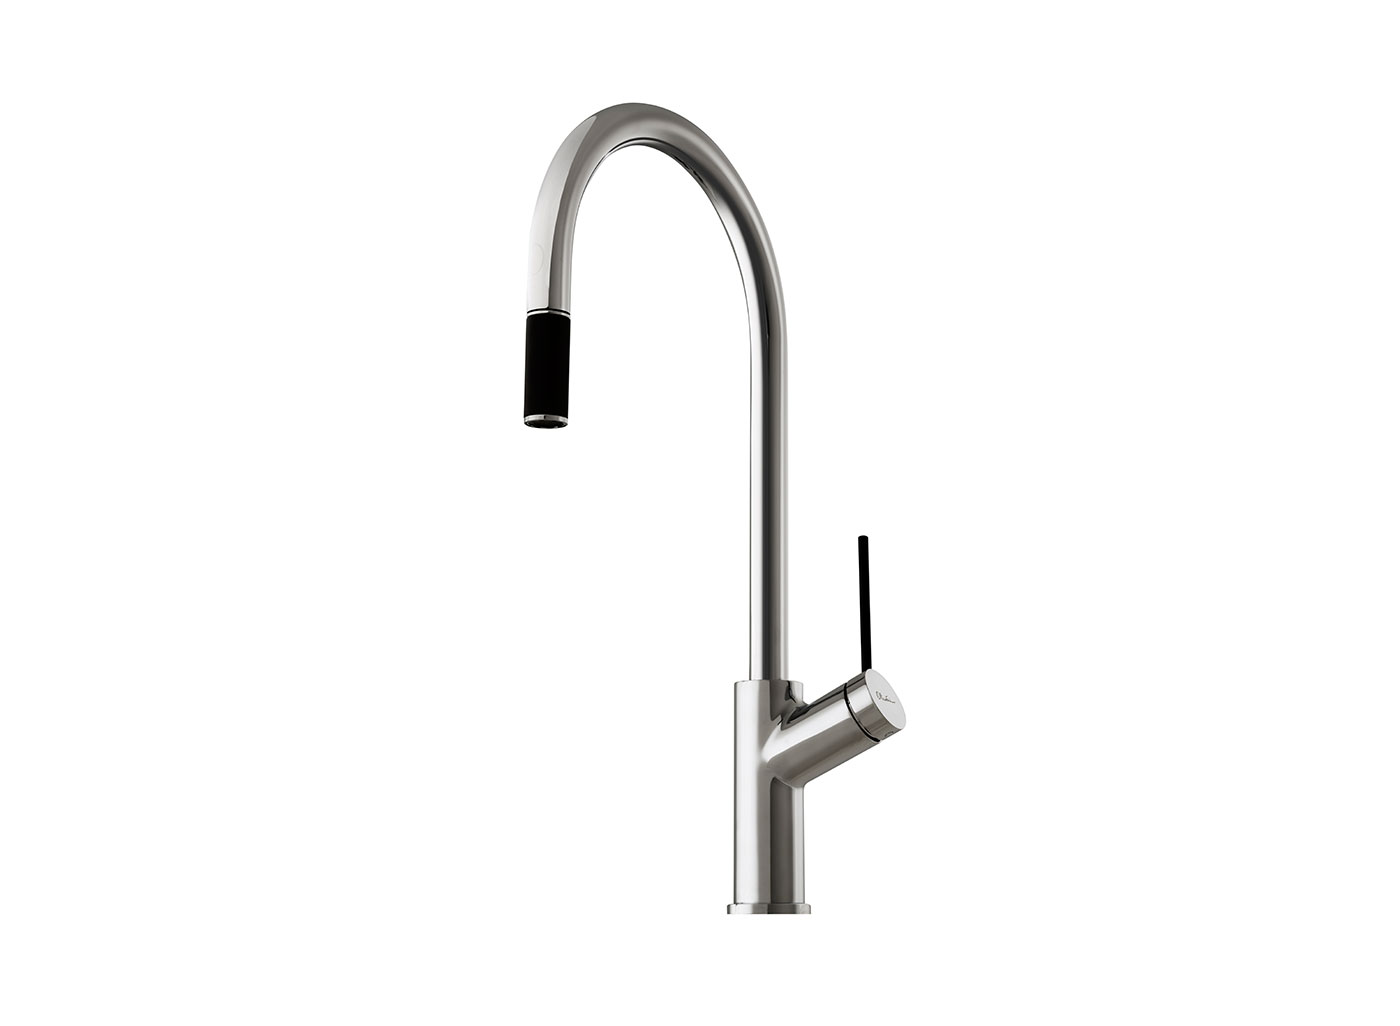 The Vilo sink mixer range by Oliveri - High in design. High in quality. Made in Italy for the Australian high life.